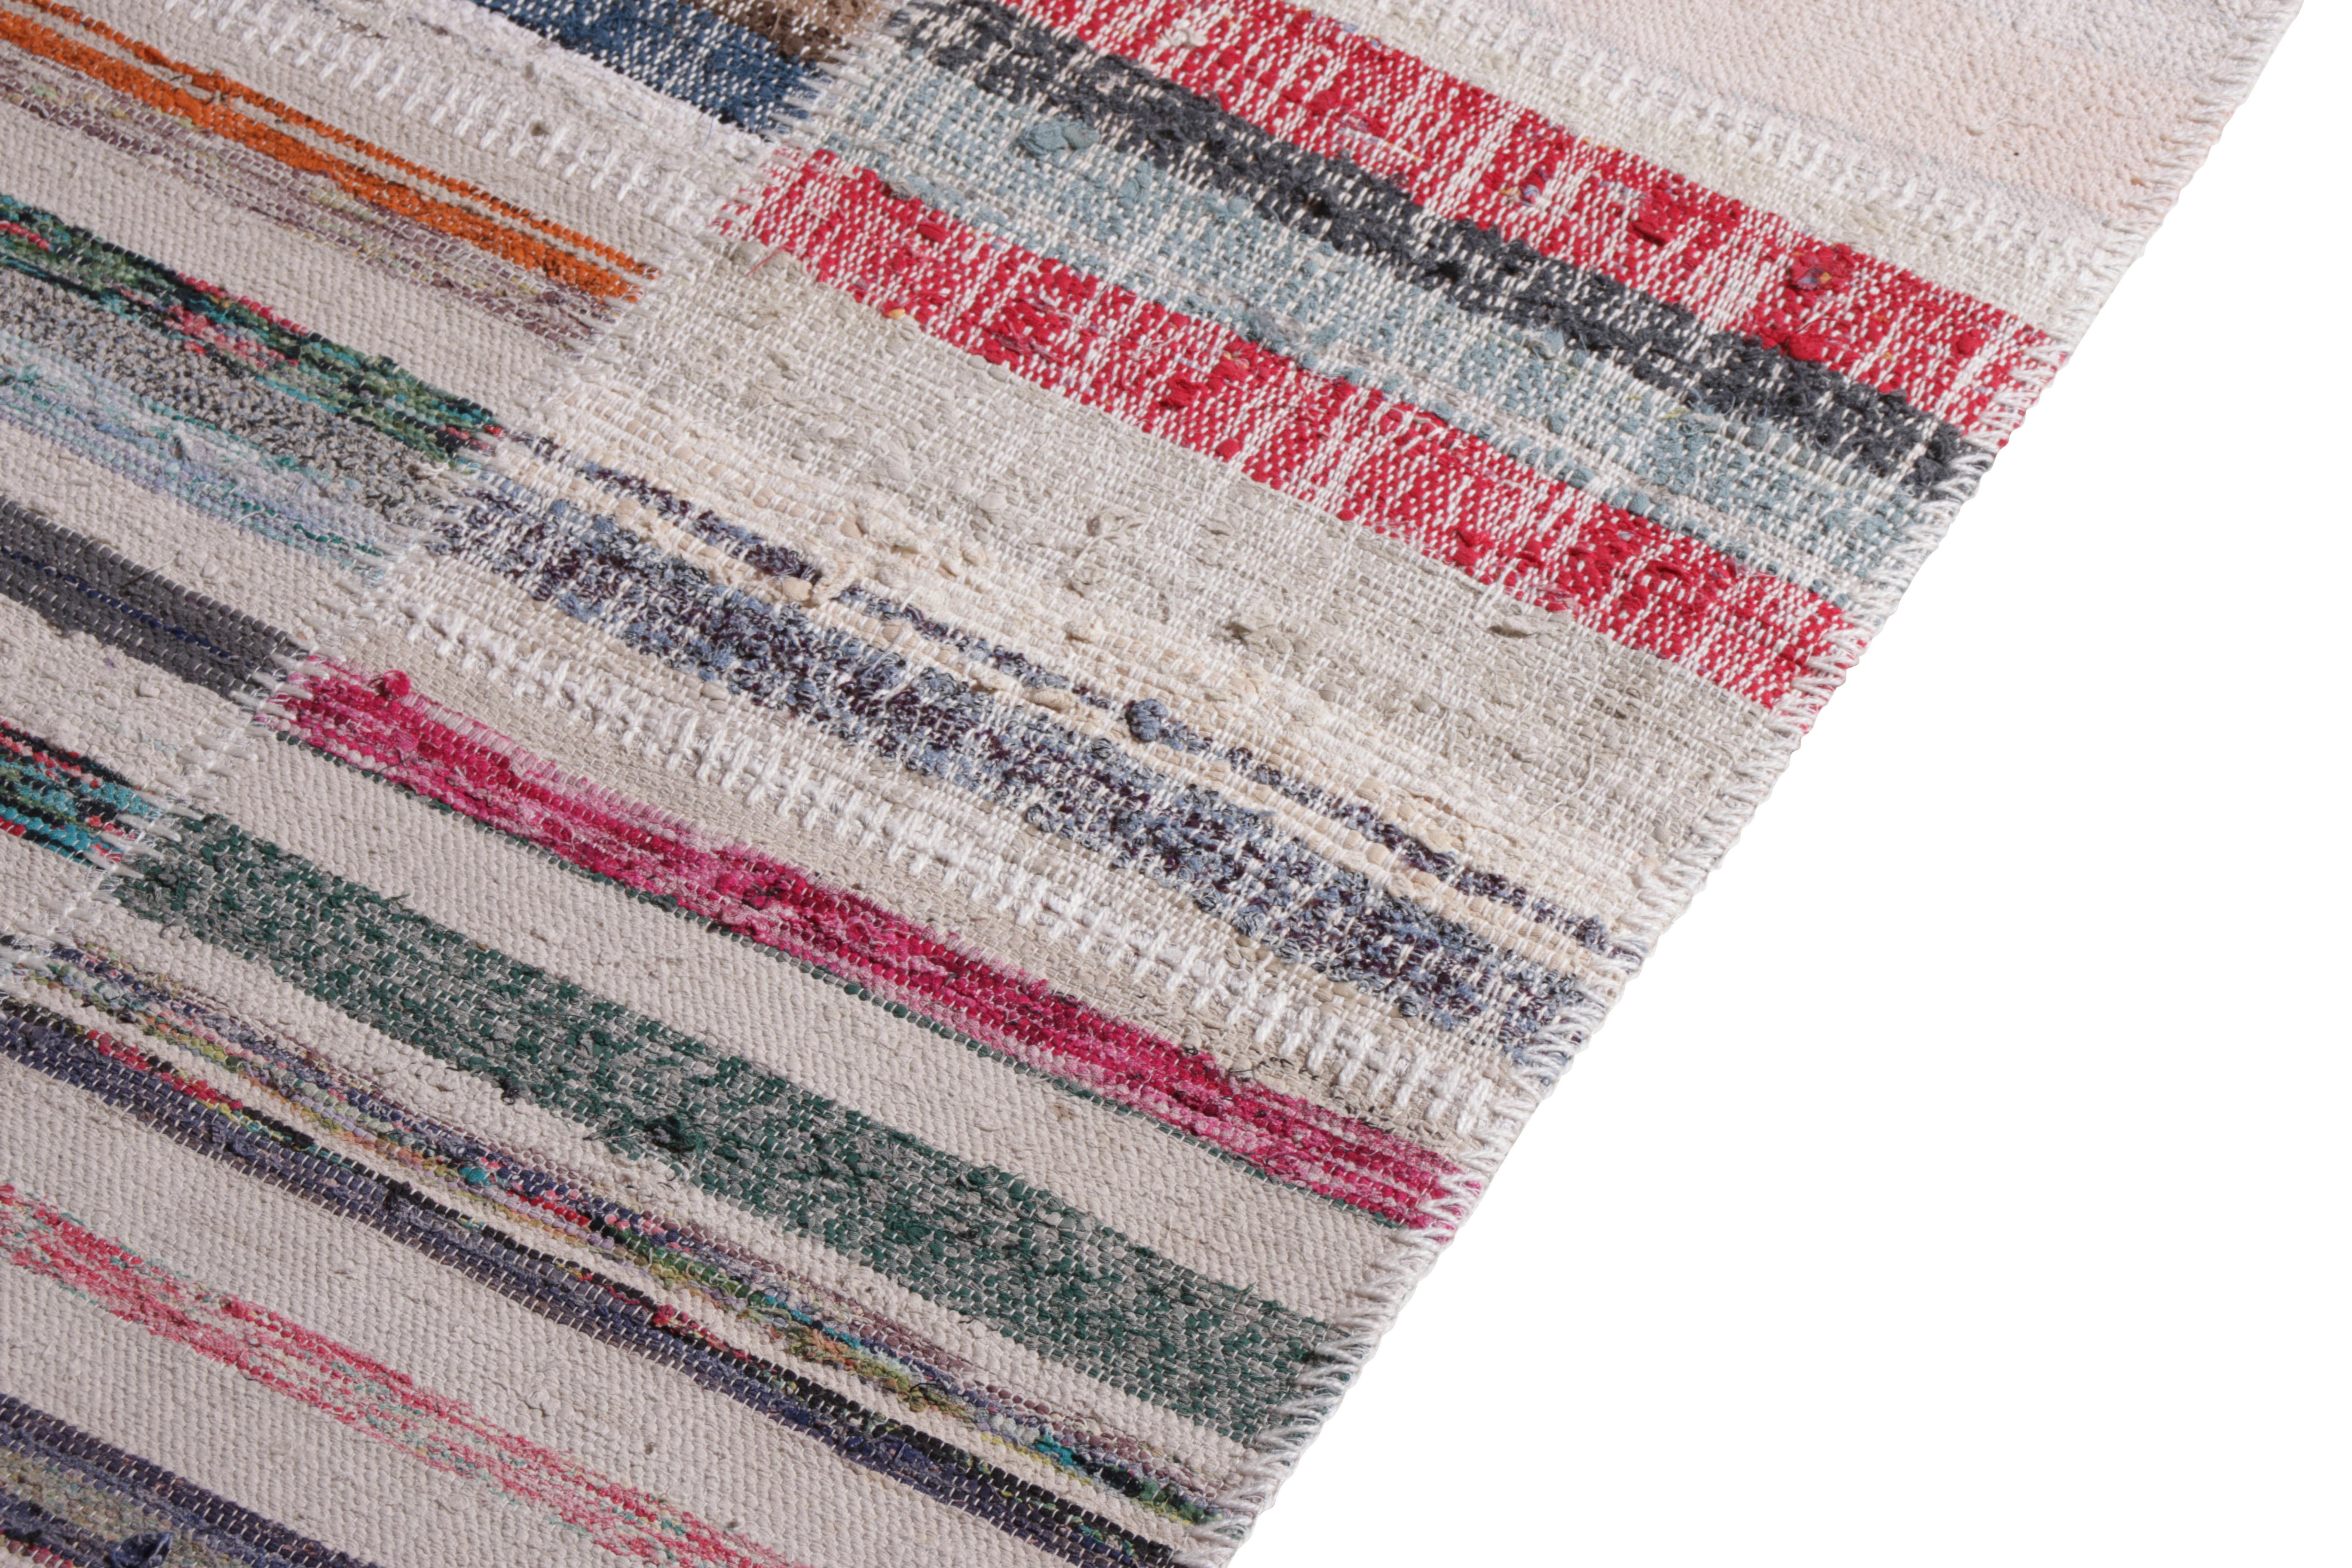 Rug & Kilim's Modern Patchwork Kilim Runner in Gray Multi-Color Stripe Pattern In New Condition For Sale In Long Island City, NY